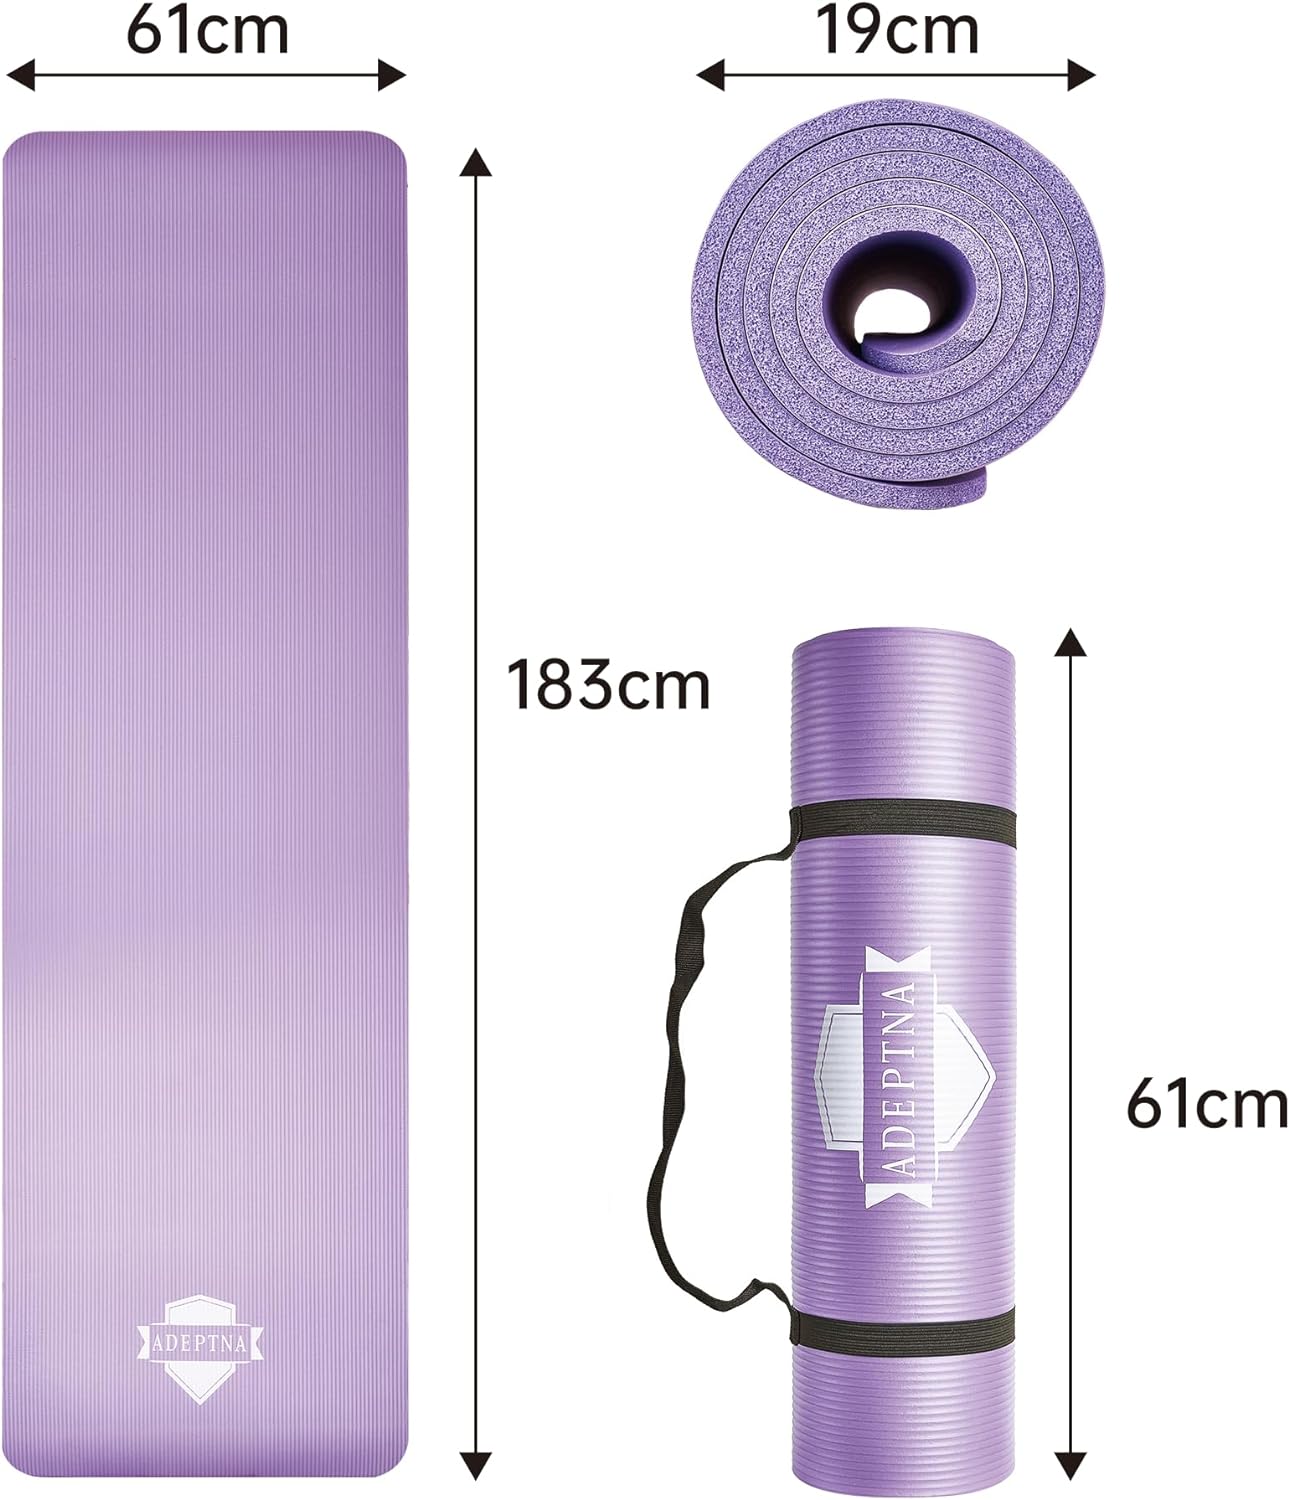 ADEPTNA Extra Thick Non-Slip Exercise Yoga Mat for Men Women Ultimate Comfort and Versatility Multi-Purpose Mat Ideal for Yoga Pilates Home Gym Exercise